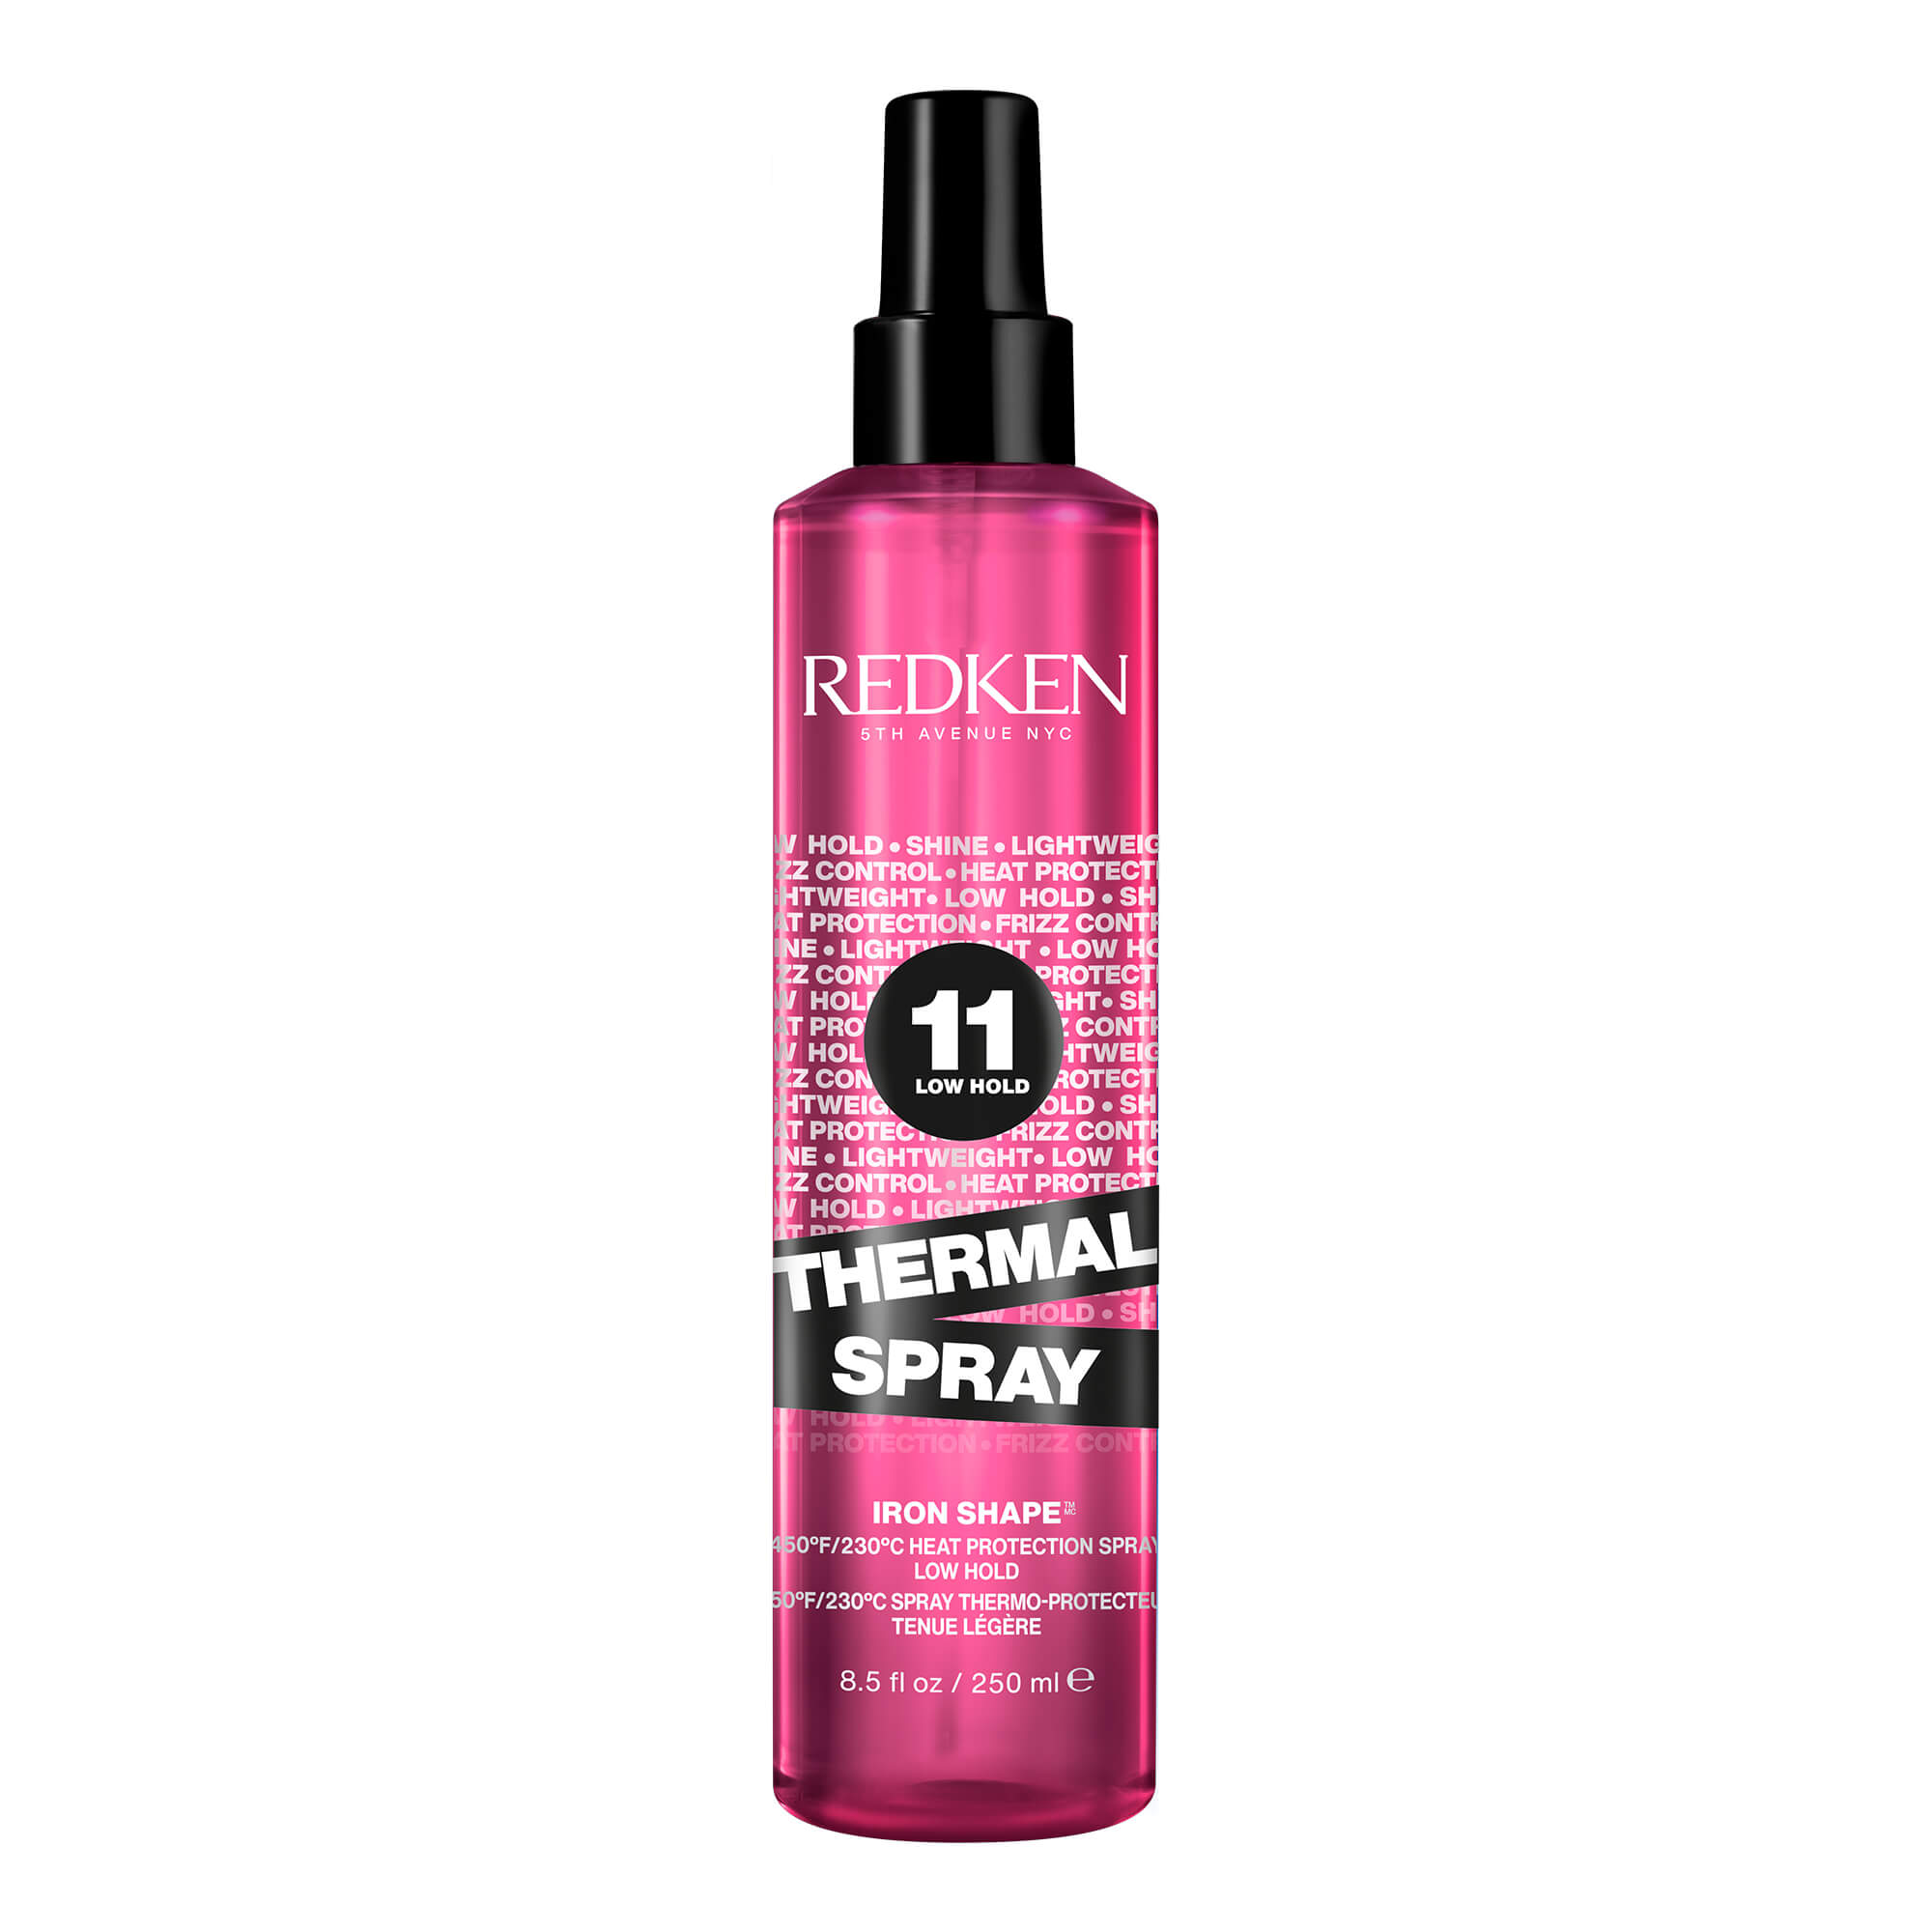 https://www.redken.ca/-/media/project/loreal/brand-sites/redken/americas/ca/product-information/product-images/styling/thermal-spray-low-hold/redken-2022-styling-reno-thermal-spray-low-hold-ecom-atf-packshot-2000x2000.jpg?rev=4e47230b4c6043ec9ae3b61f1dcd032b